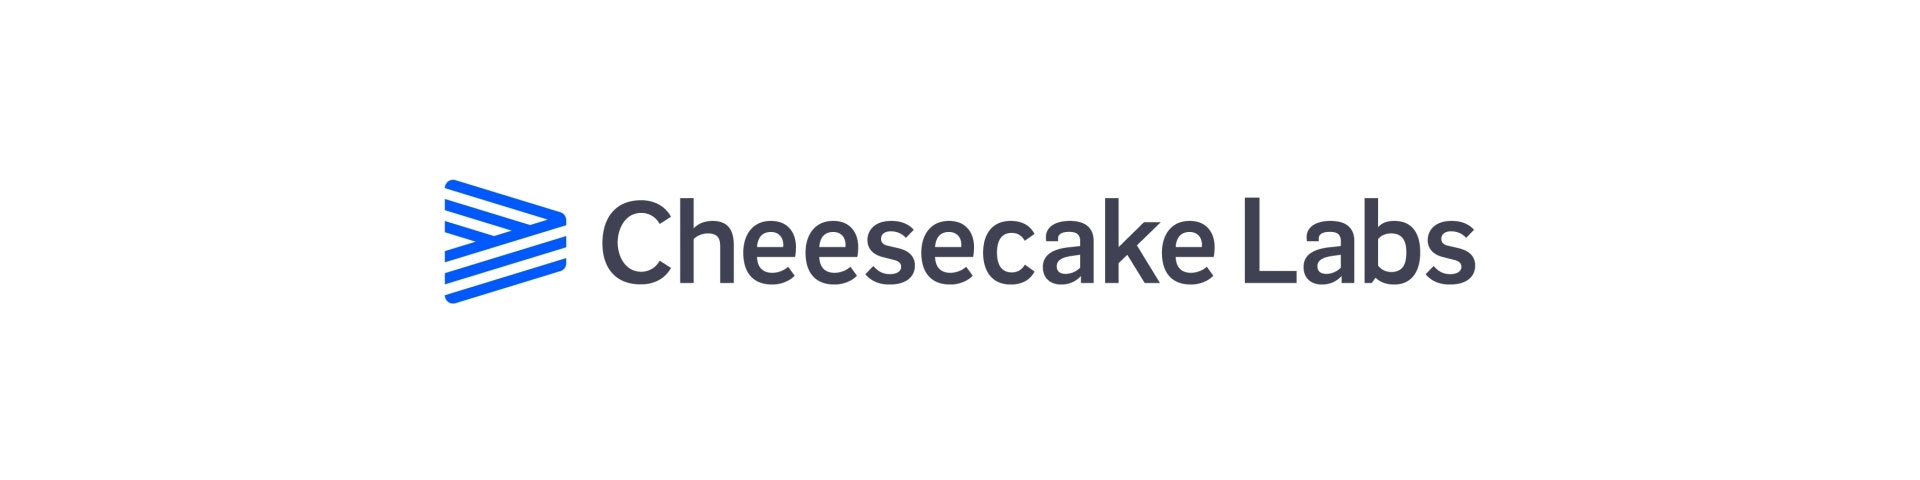 Cheesecake Labs